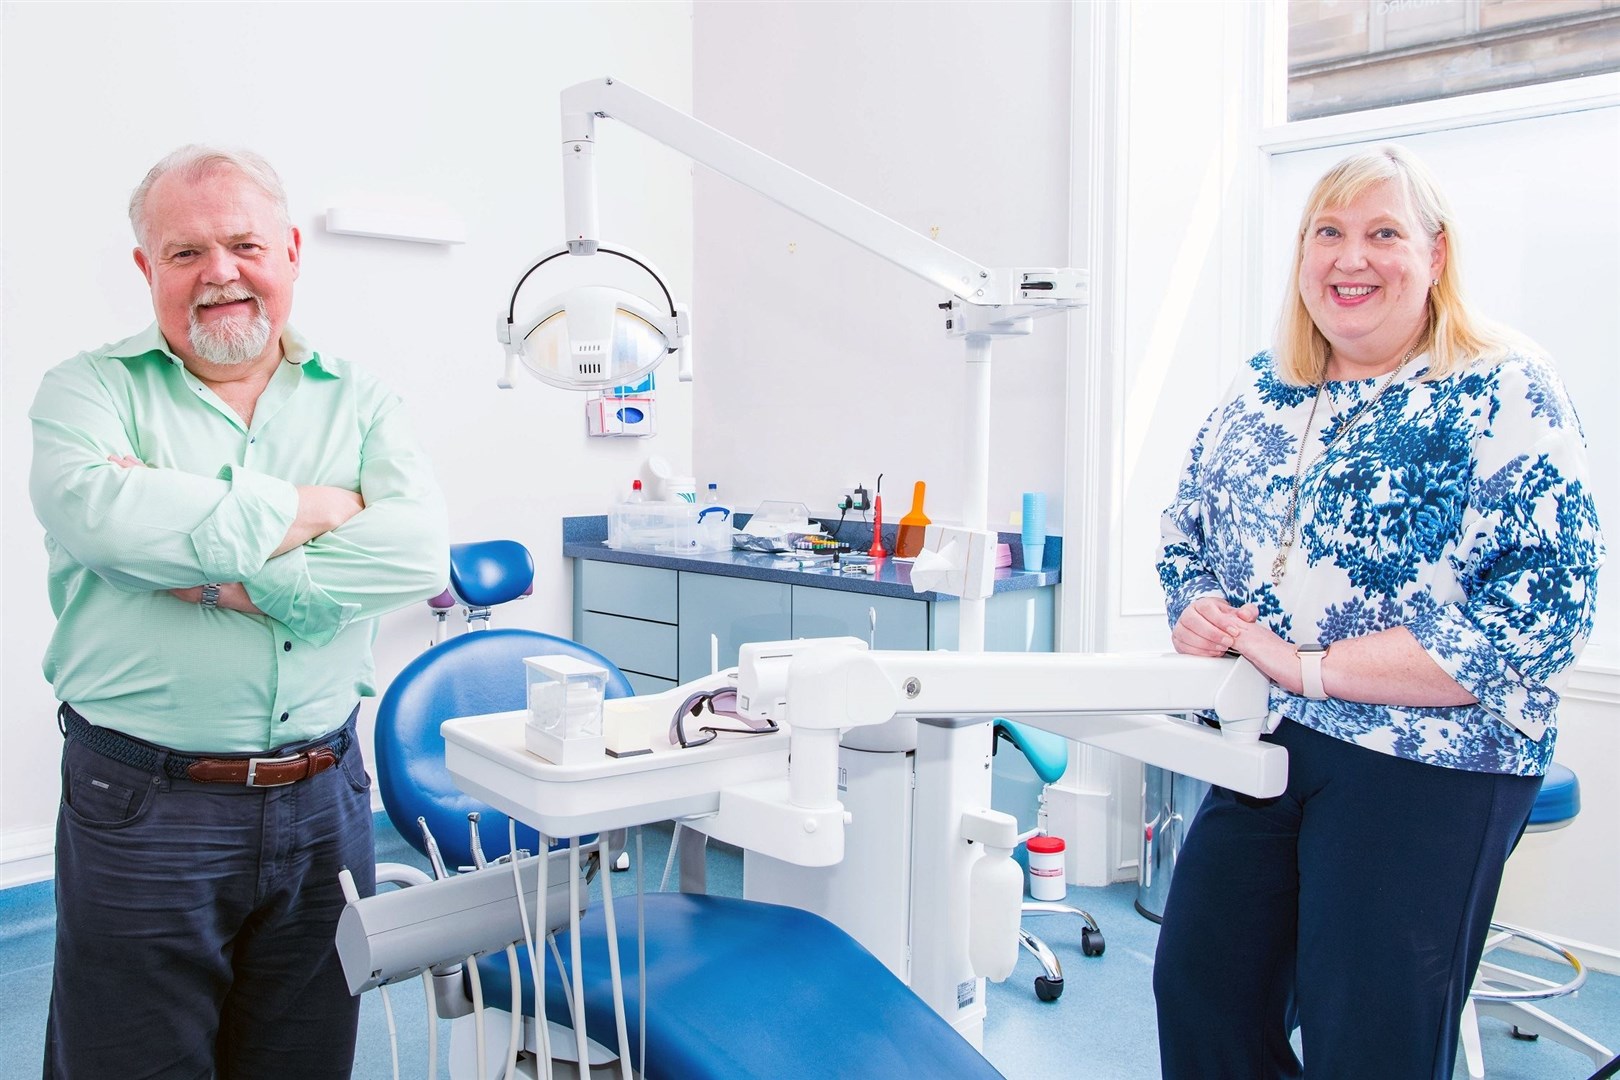 Clyde Munro Dental Group, CEO and Founder, Jim Hall and Jacqui Frederick.